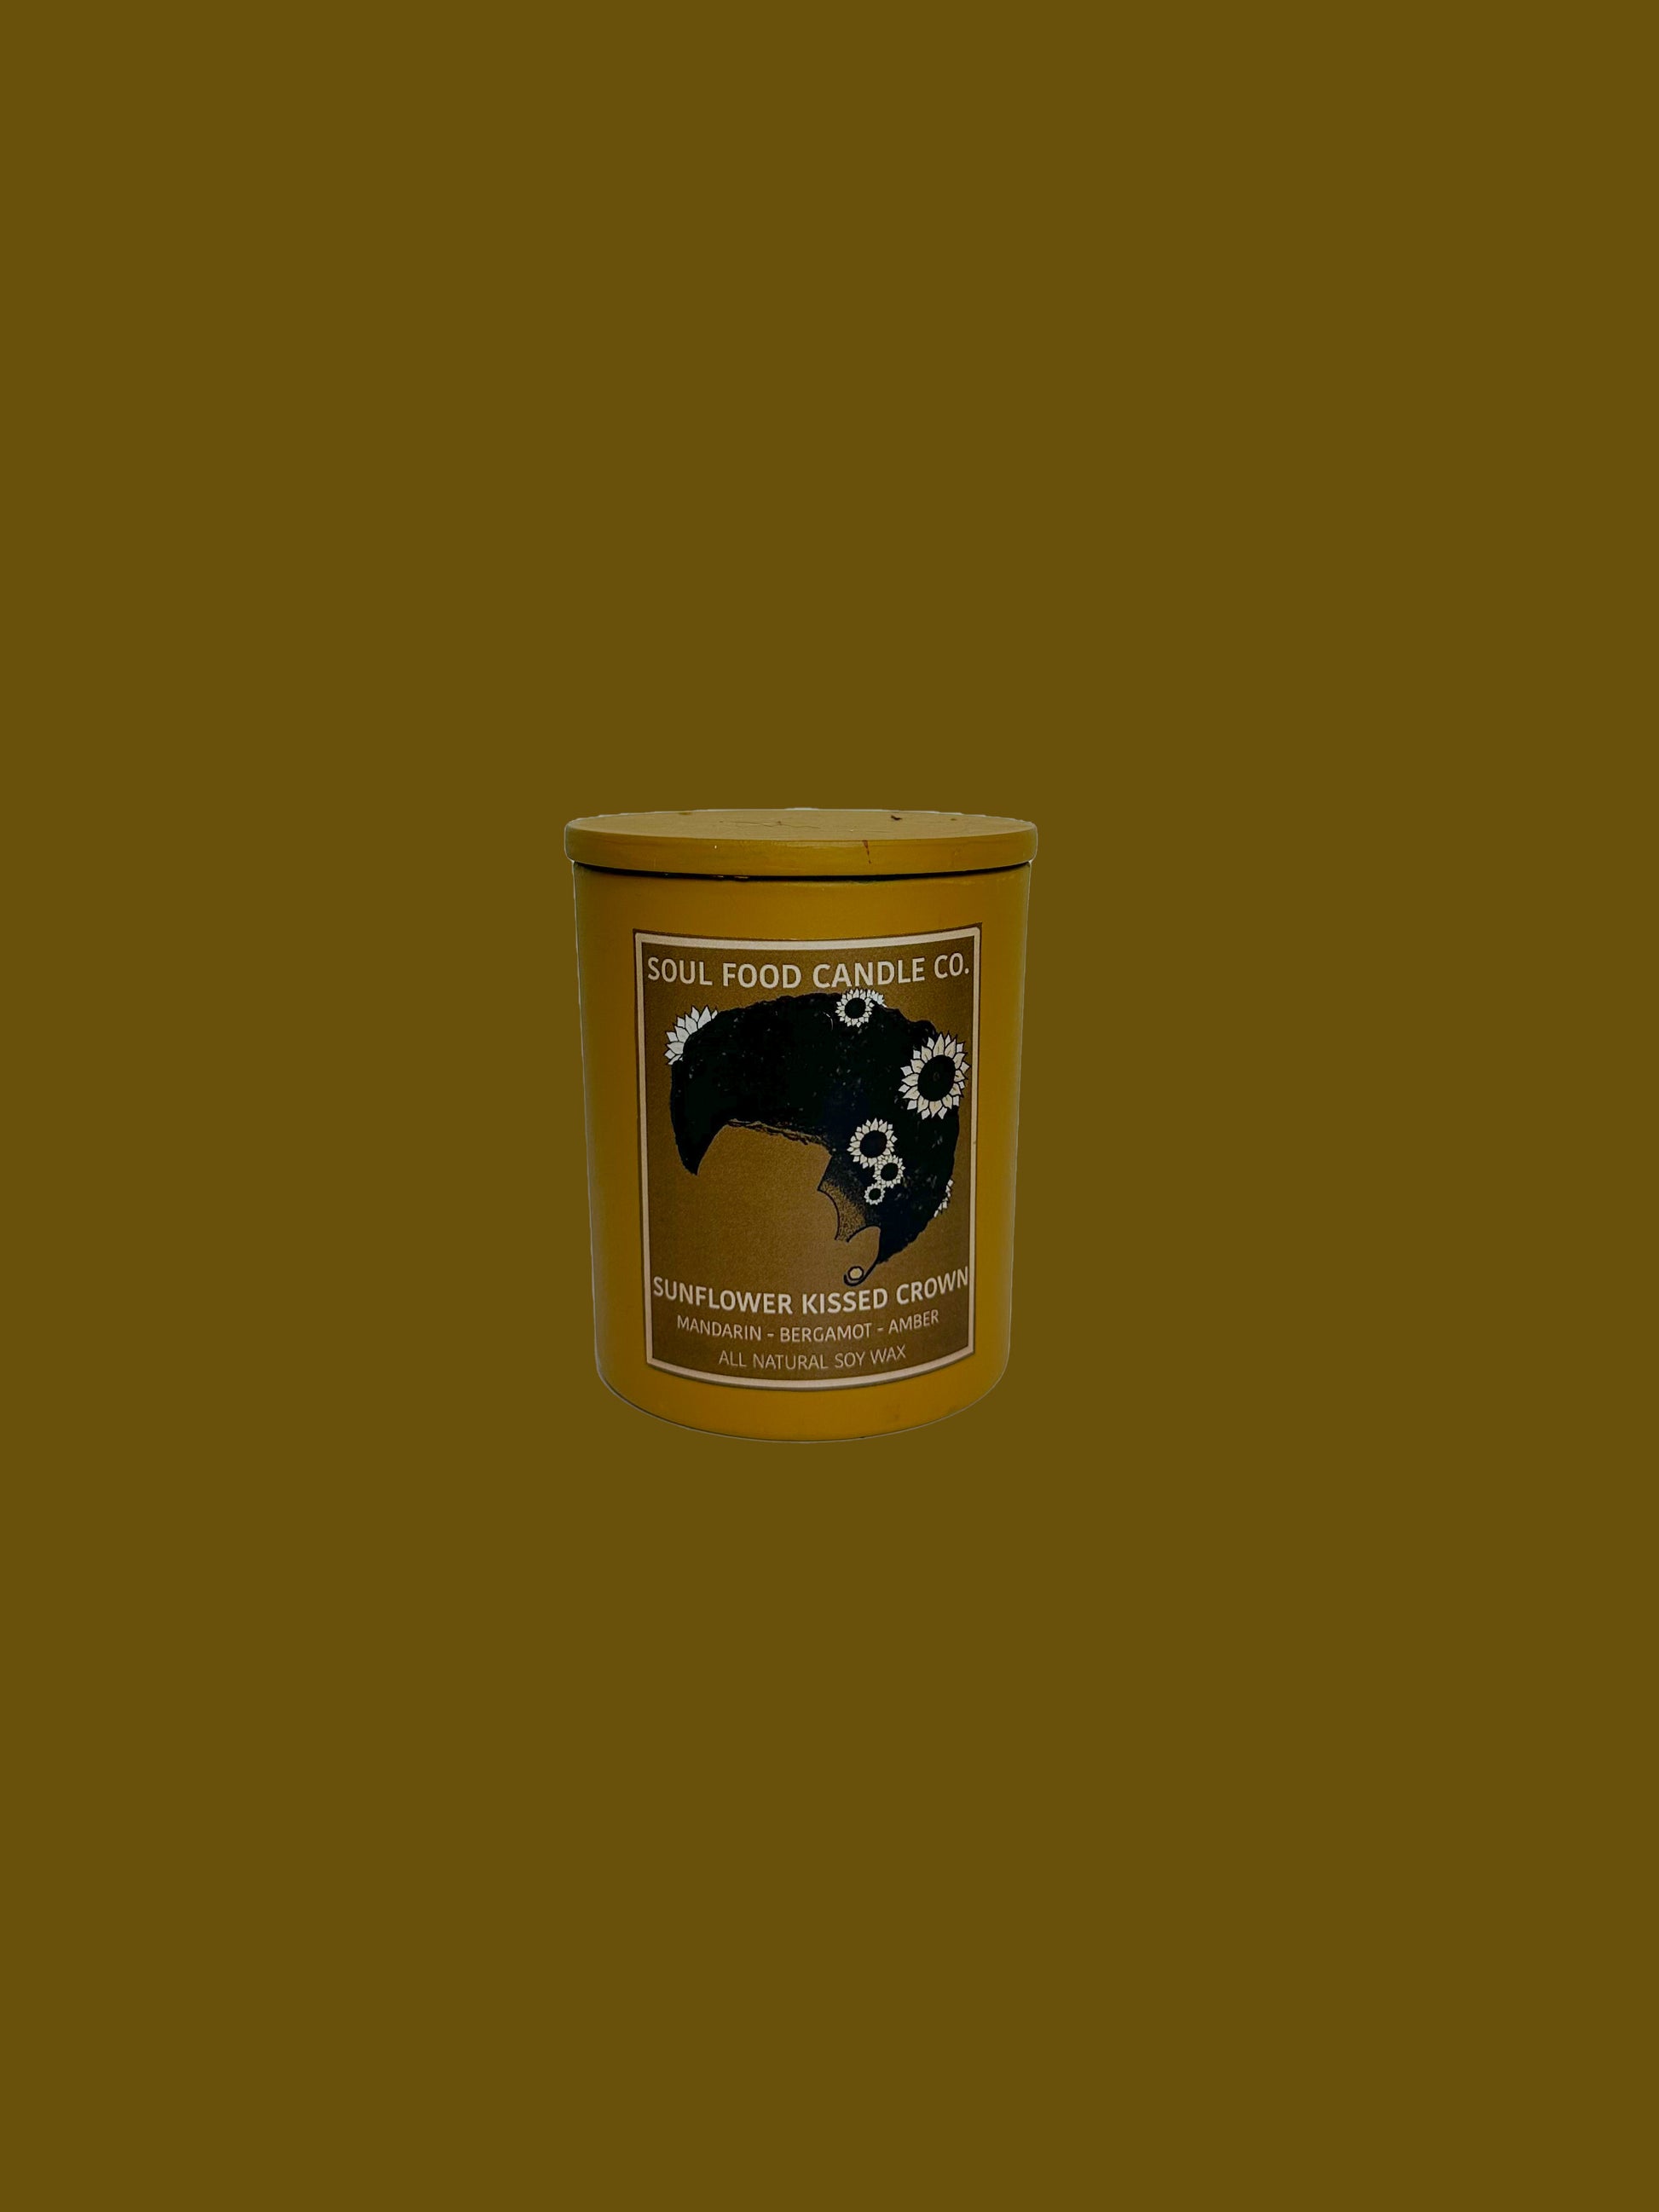 Sunflower Kissed Crown - Soul Food Candle Company